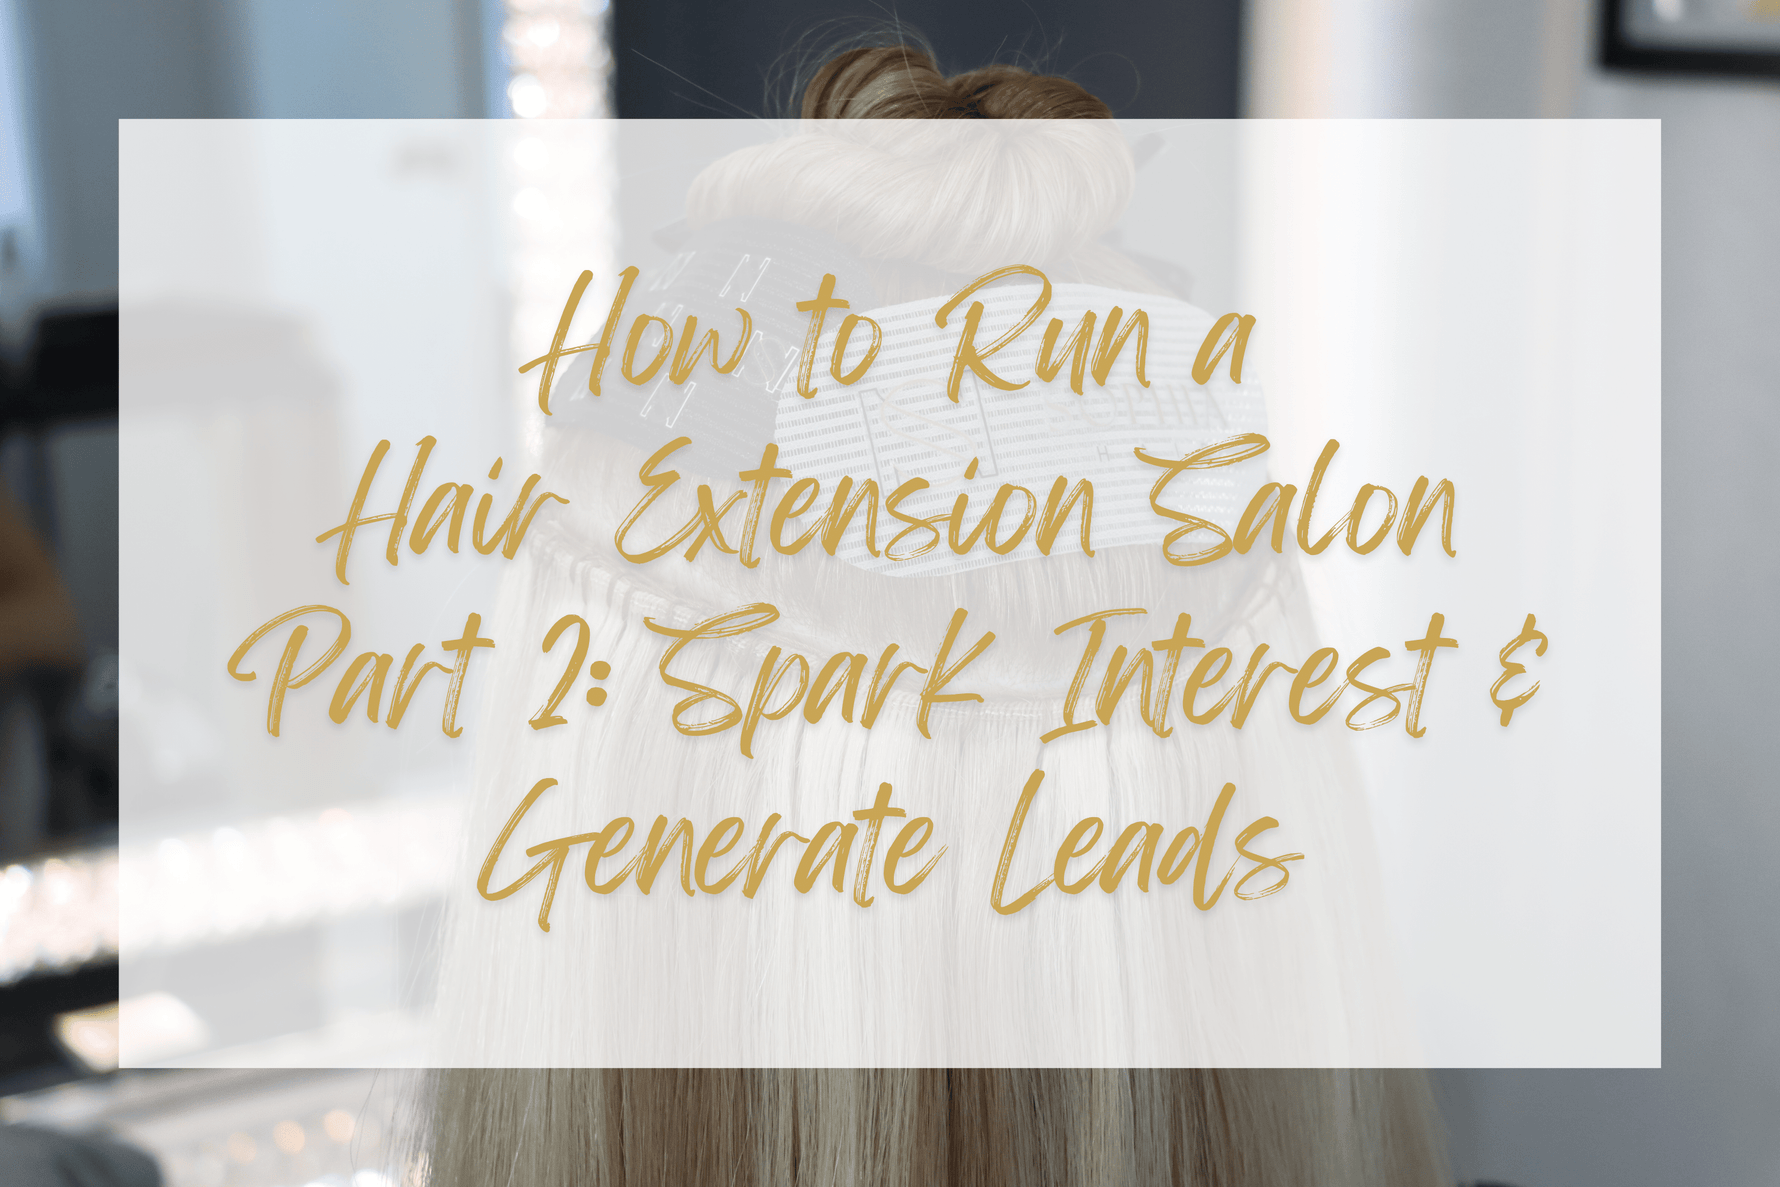 Hpw to run a hair extension salon - Part 2:Spark Interest & Generate Leads